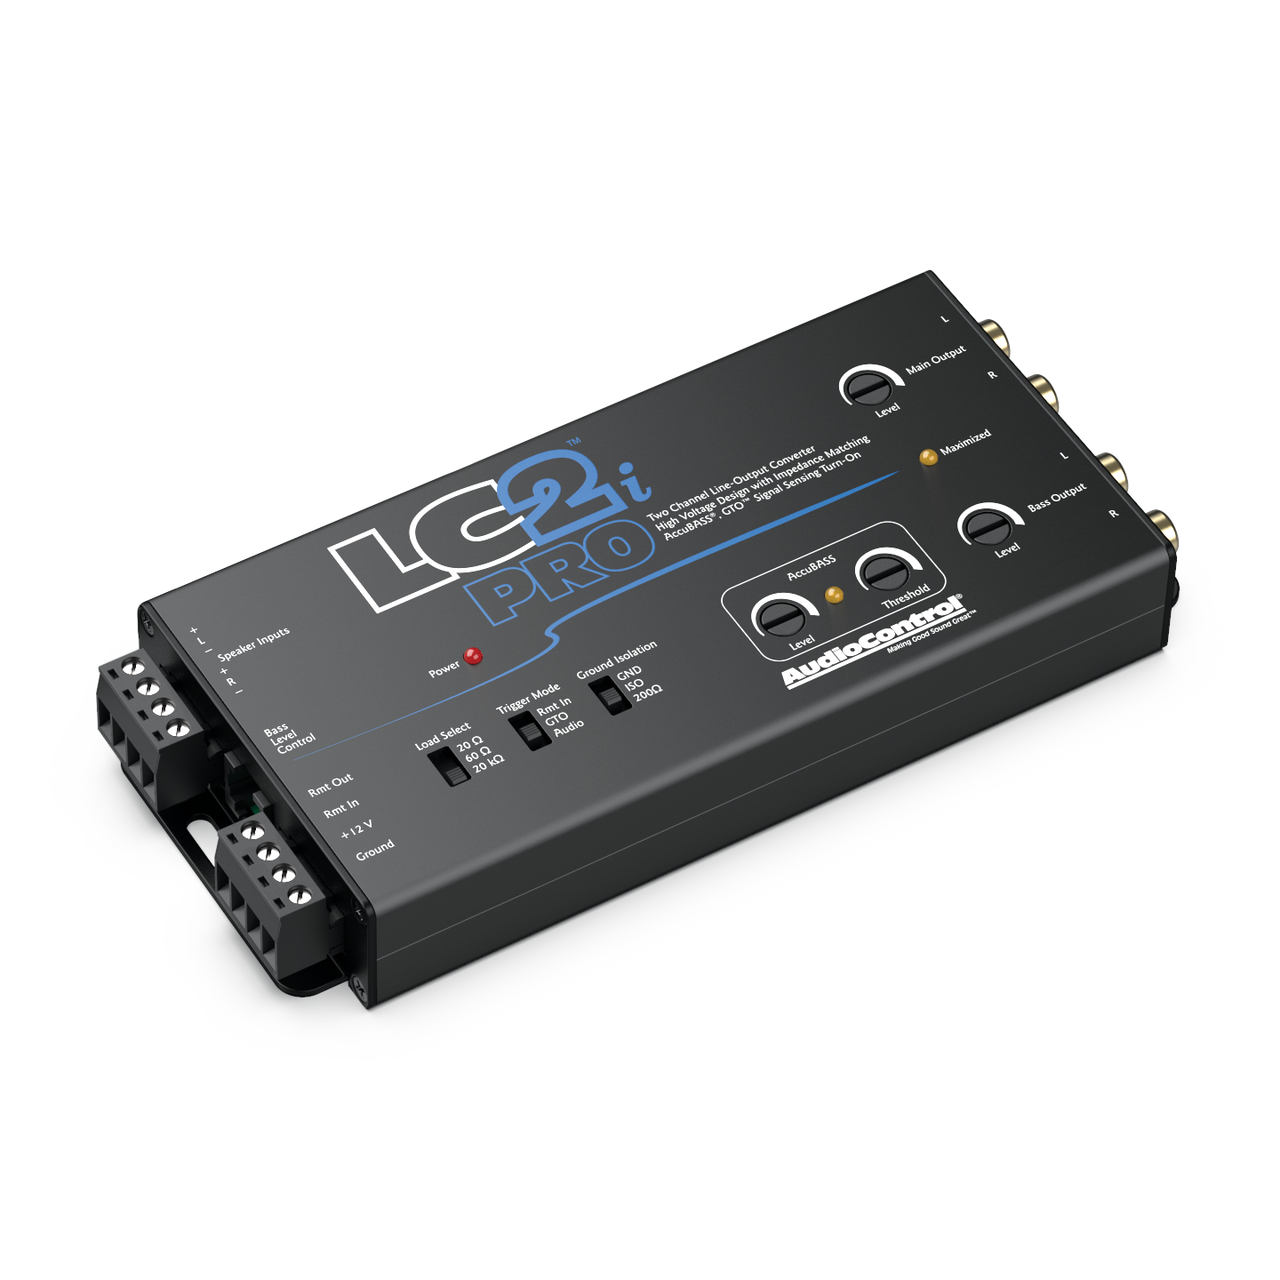 Audio Control LC2i & ACR-1 2 Channel Line Out Converter Accubass and Subwoofer control & ACR-1 dash remote